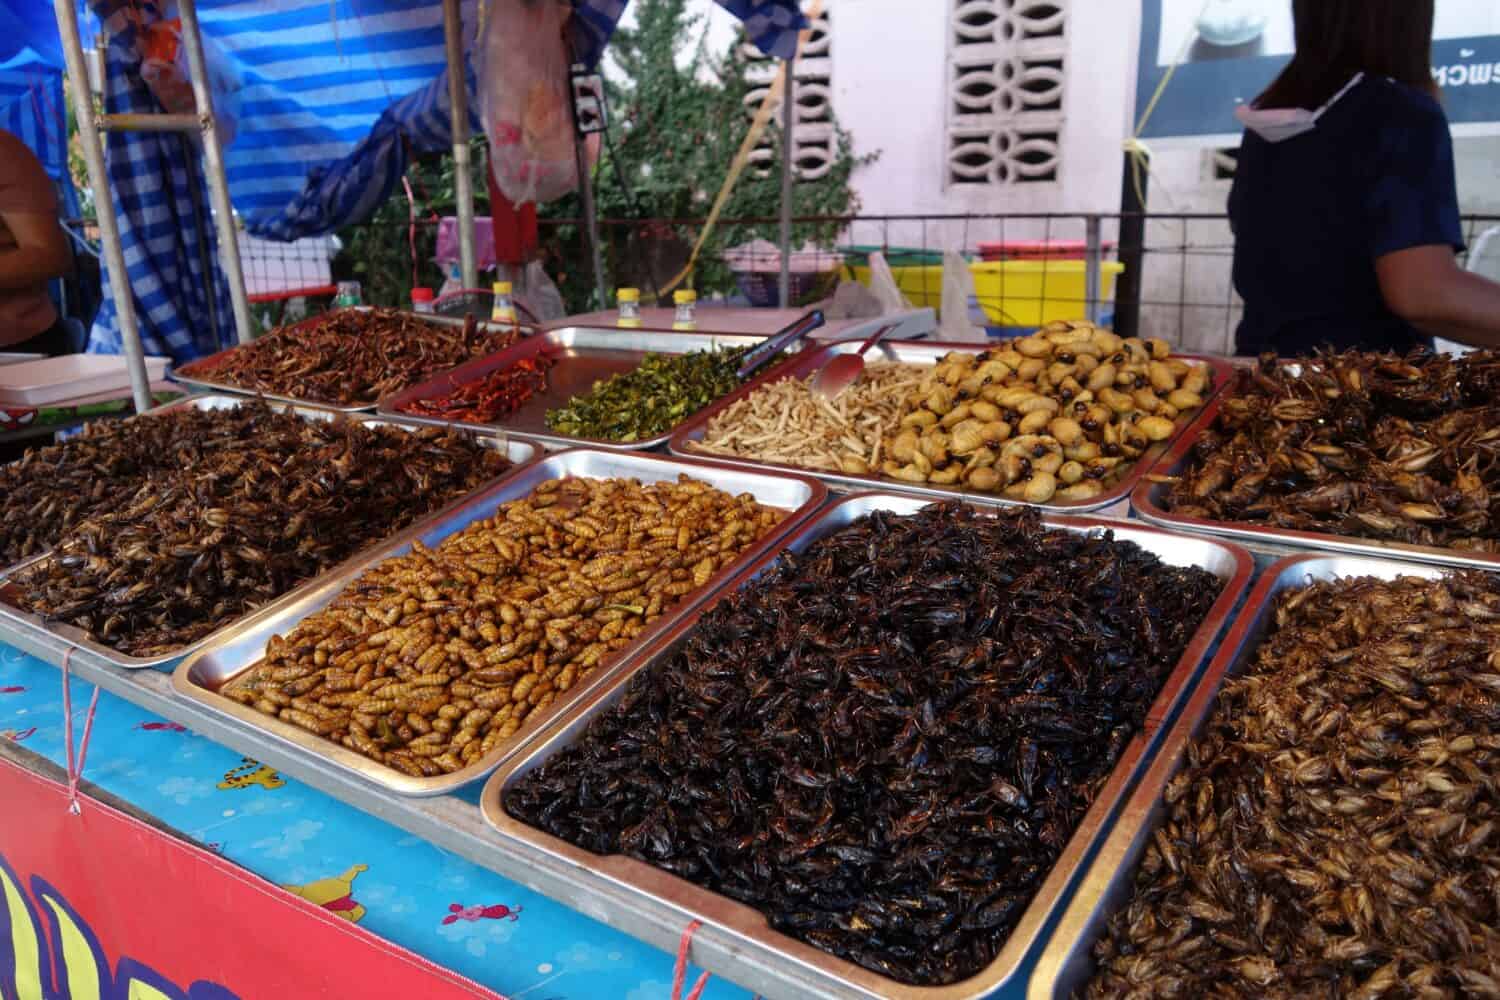 Phuket, Thailand - edible bugs and insects for sale in a Thai market stall